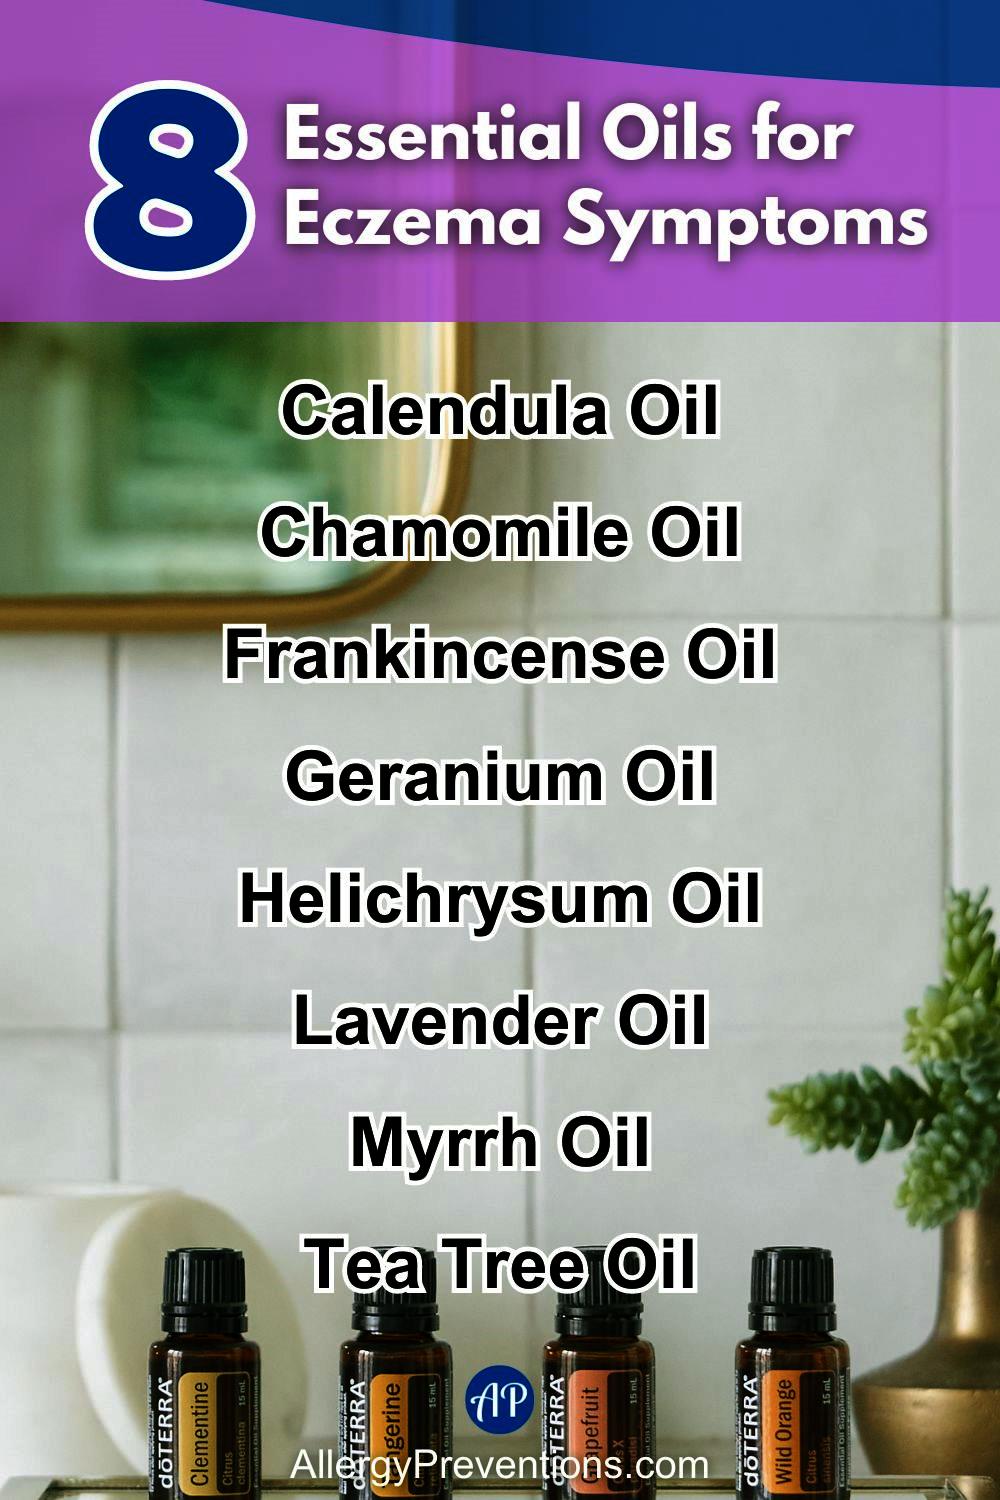 Essential oils for eczema symptoms infographic. These essential oils have shown to be beneficial for easing eczema symptoms naturally: Calendula Oil, Chamomile Oil, Frankincense Oil, Geranium Oil, Helichrysum Oil, Lavender Oil, Myrrh Oil, and Tea Tree Oil.